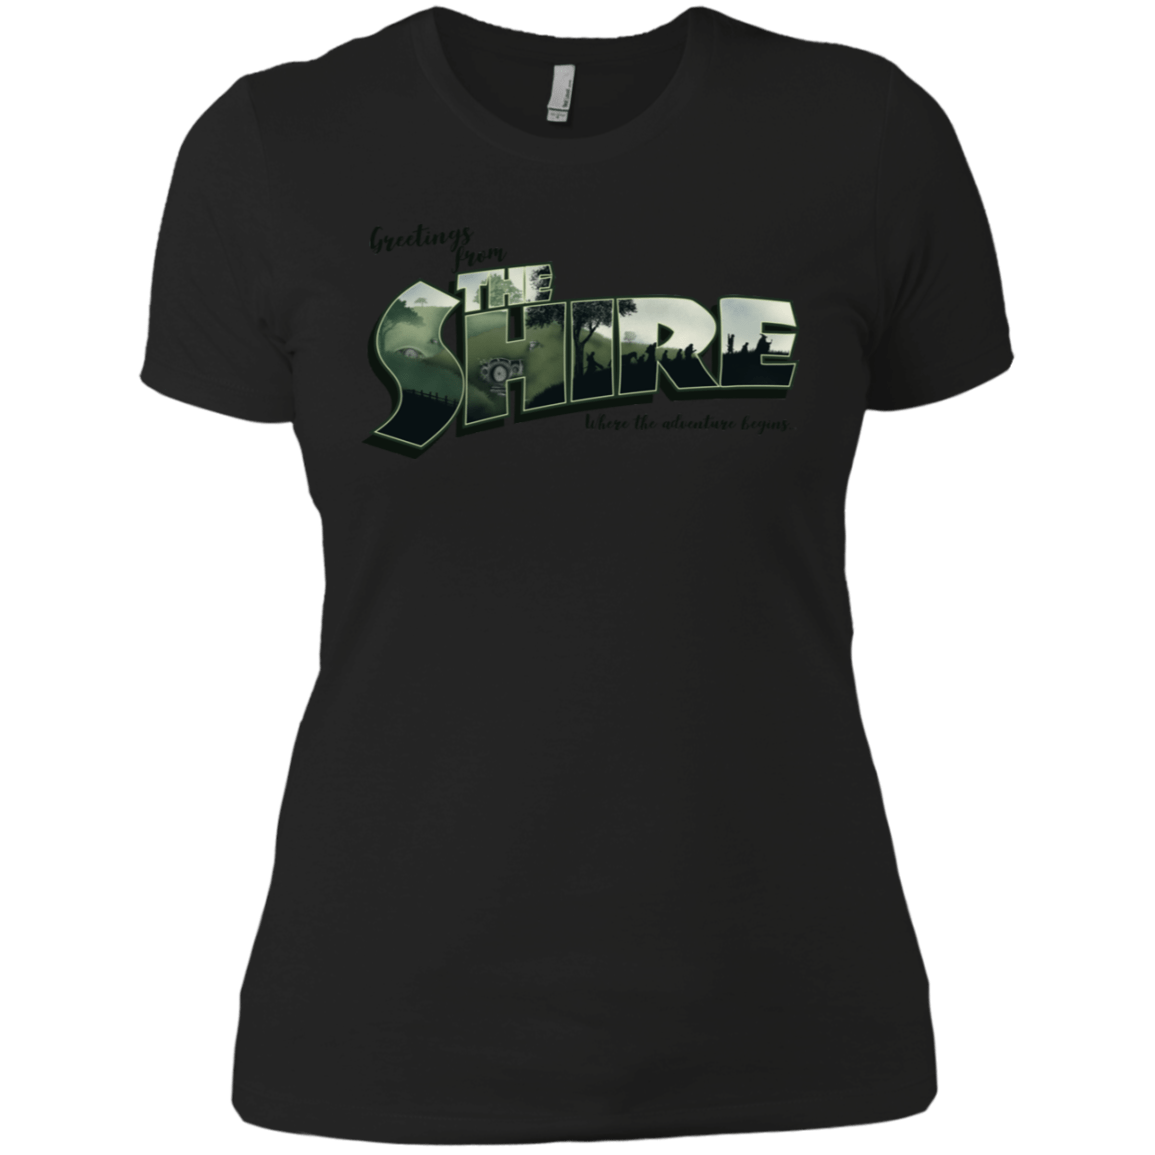 T-Shirts Black / X-Small Greetings from the Shire Women's Premium T-Shirt